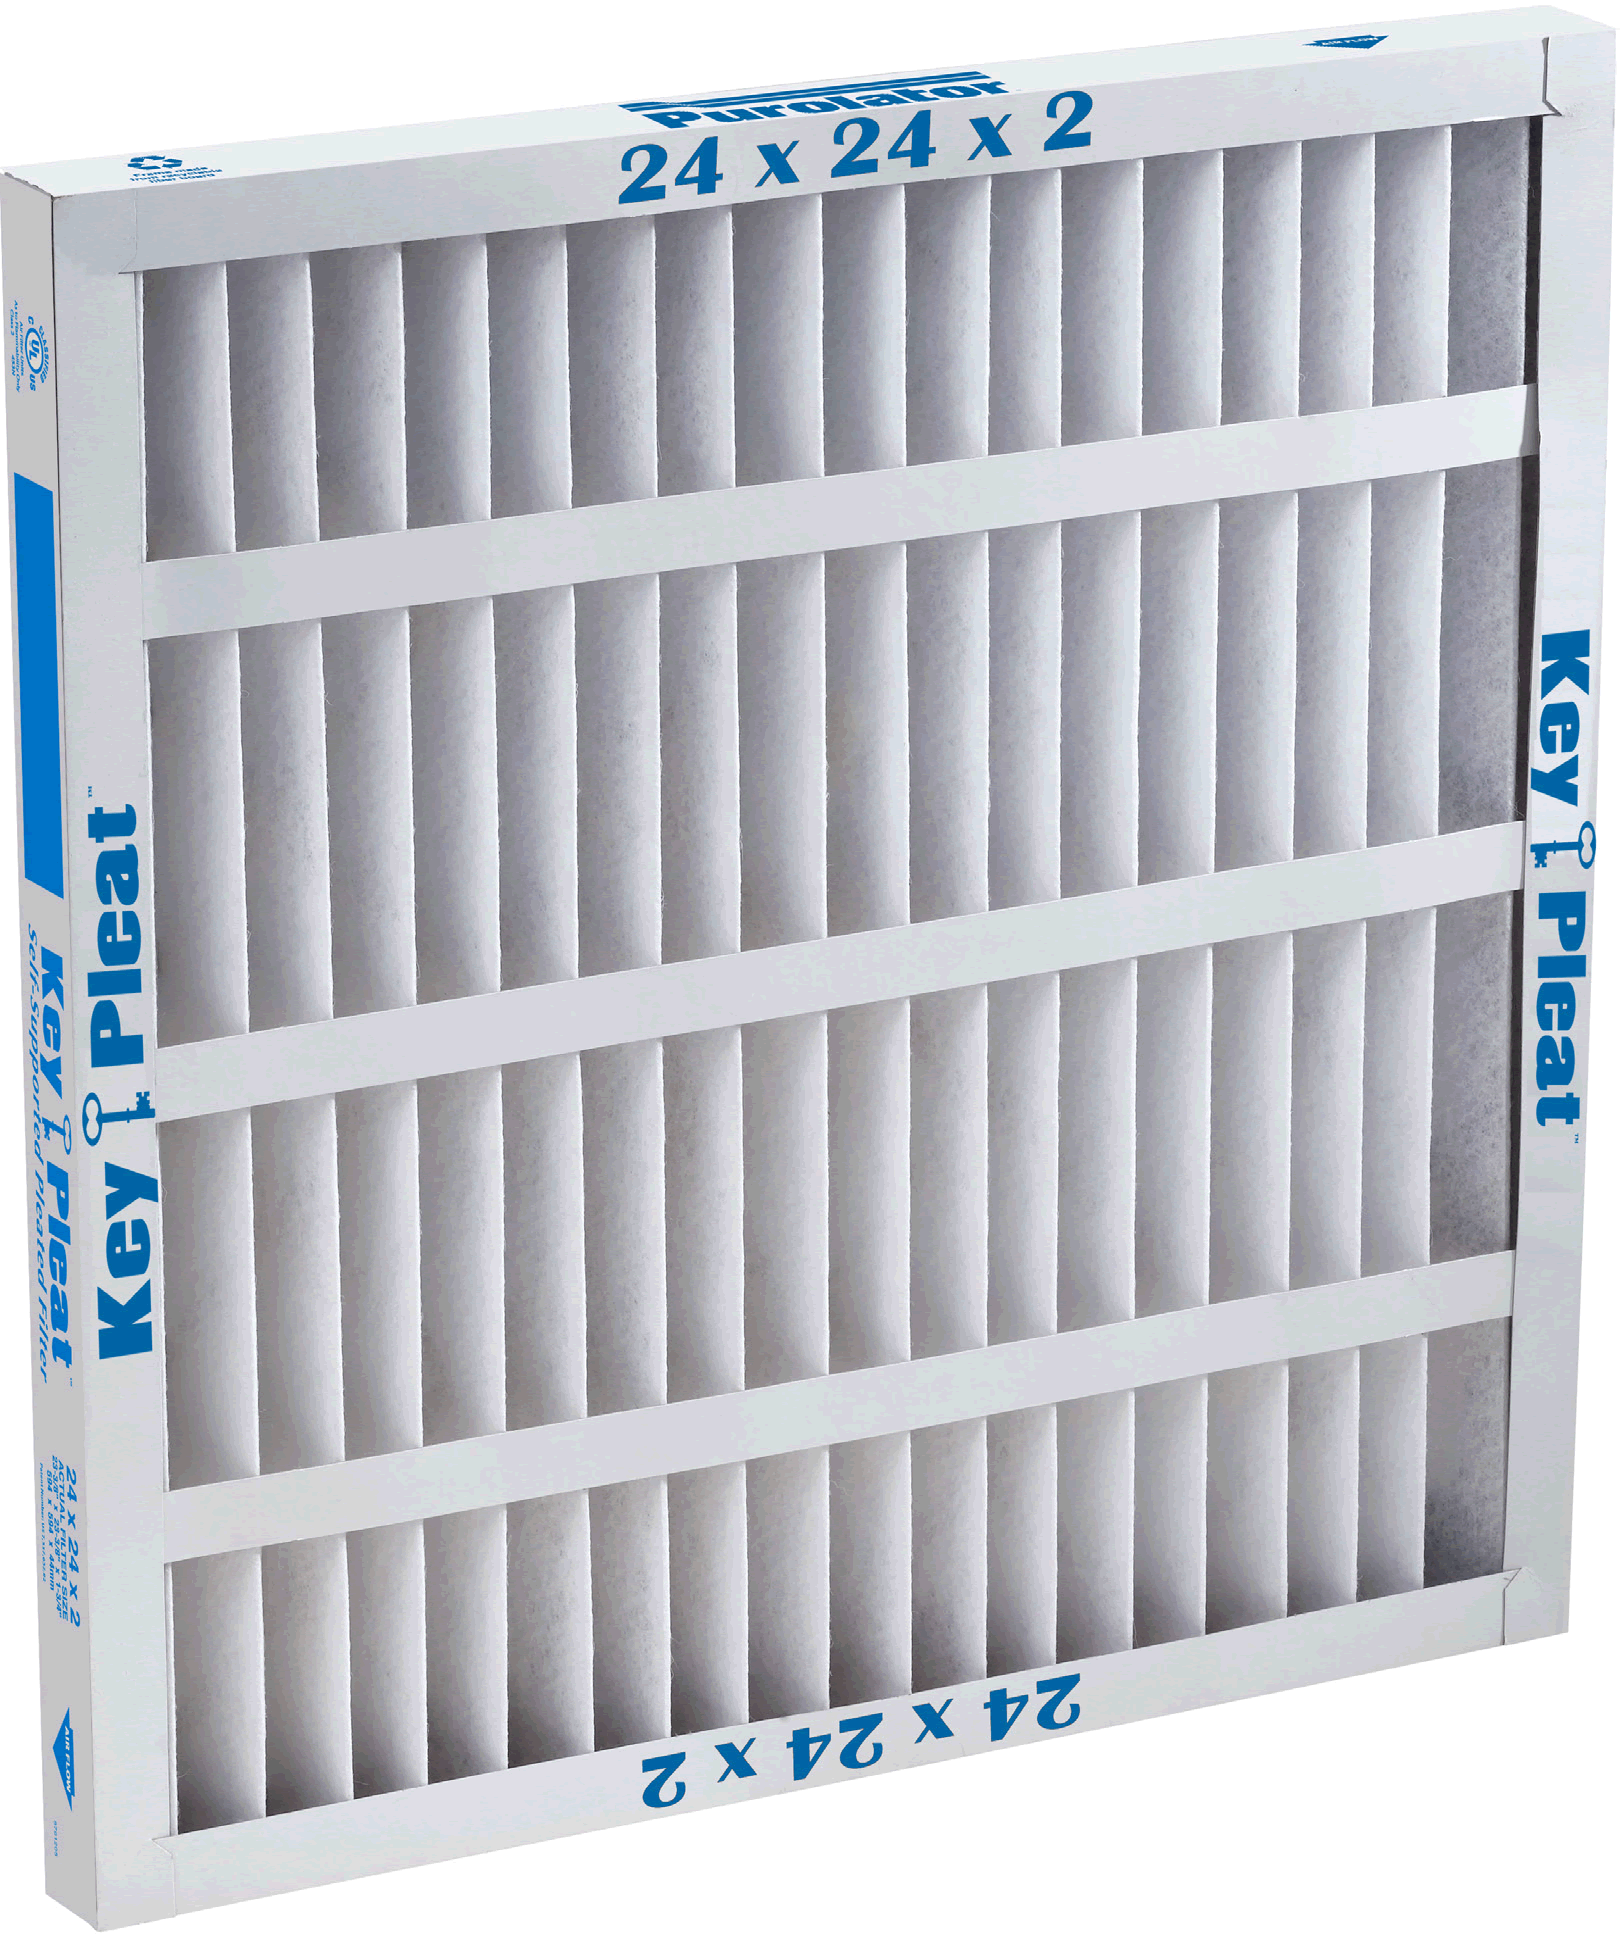 Pleated Fabric 18 x 30 x 1 Commercial Water Dist Pack of 6 ReplacementBrand P15S-611830-6-PACK P15S-611830 Pleated Air Filter 18 x 30 x 1 MERV 11 P25S-642020-6-PACK 